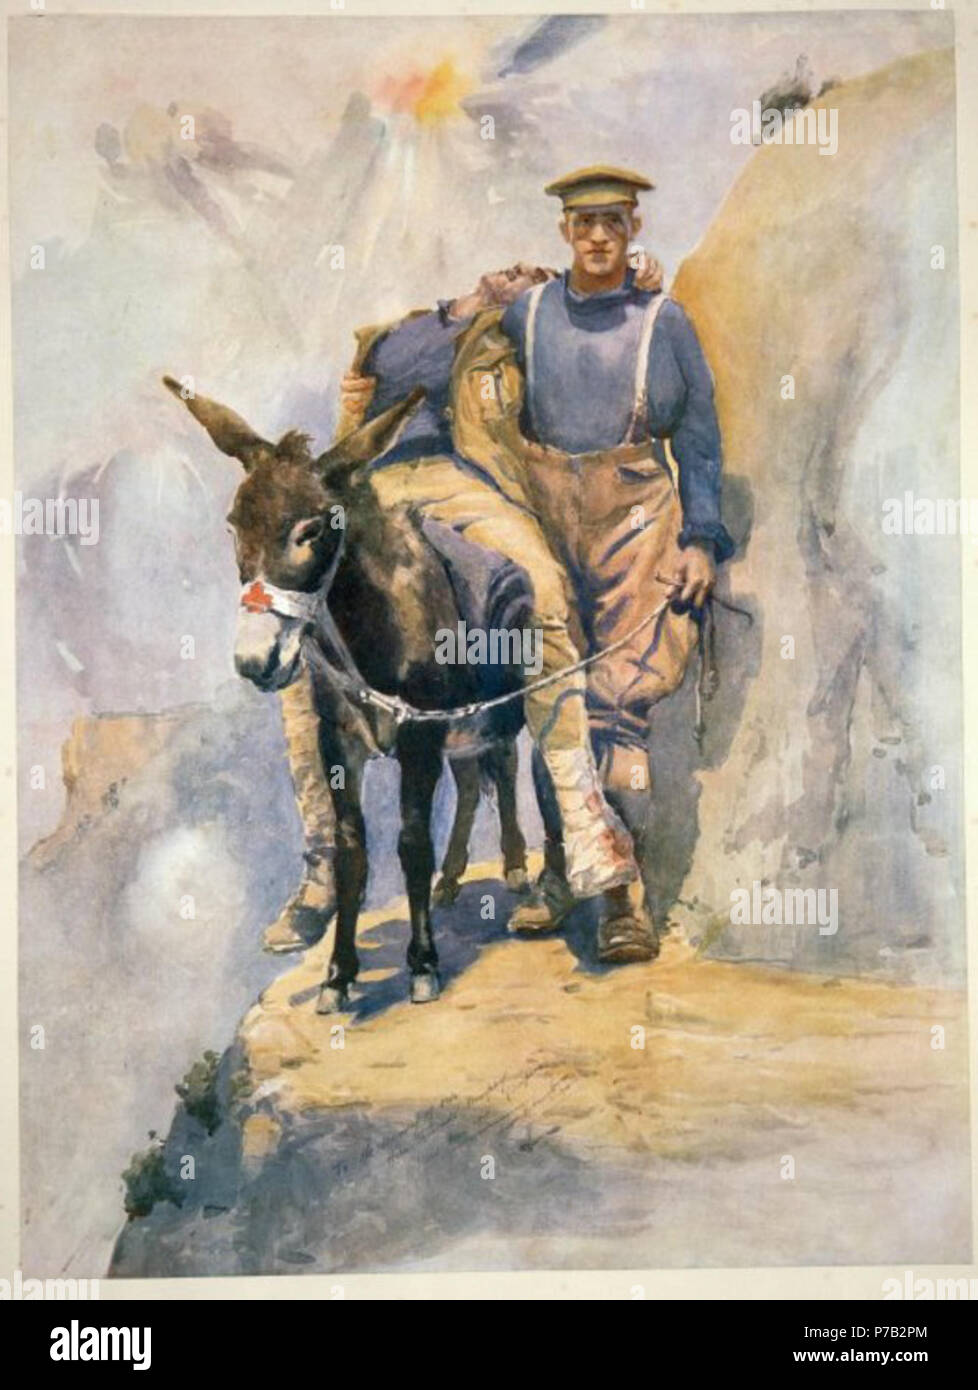 English: A 1918 watercolour painting titled To the memory of our hero comrade 'Murphy' (Simpson) killed May 1915. Heroes of the Red Cross. Private Simpson, D.C.M., & his donkey at Anzac, depicting a medic and his donkey helping an injured man back to base at Gallipoli. Despite the title, this was actually based on a photo of the medic Lt. Richard Henderson (1895-1958), who took up the role after Simpson was killed.[1] Printed in England and published by W. J. Bryce, 24a Regent Street, London, S.W. 1. 1918. 1918 65 Private Simpson, D.C.M., &amp; his donkey at Anzac Stock Photo